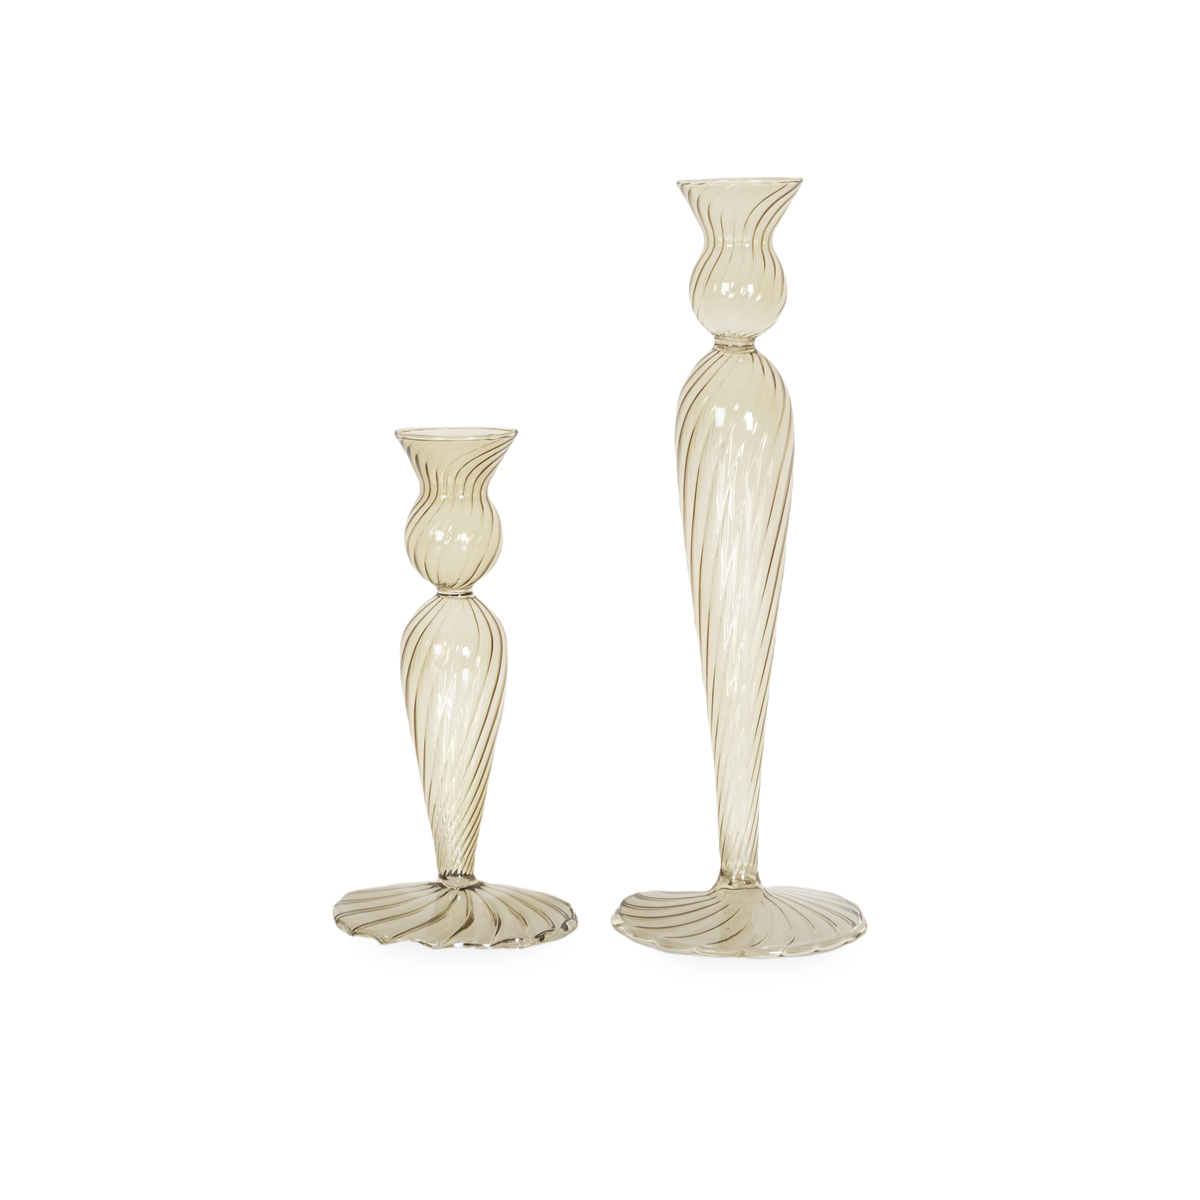 Bringing a touch of sophisticated design, the Swirl Glass Candle Holder features a visually pirouetting, tall silhouette and gentle curves.